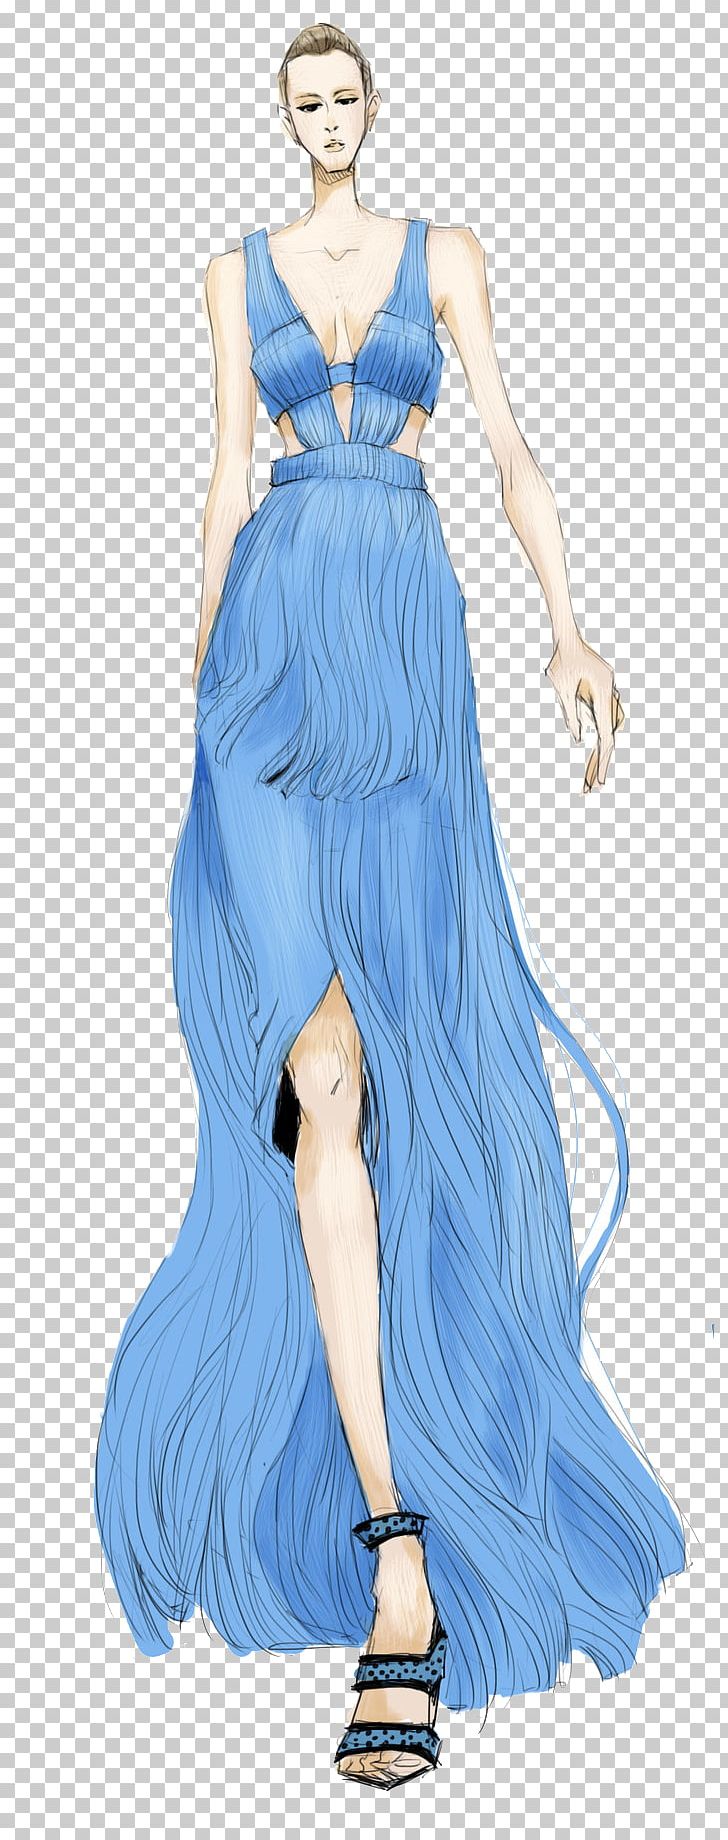 Gown Fashion Design Dress PNG, Clipart, Blue, Electric Blue, Fashion, Fashion Illustration, Fashion Model Free PNG Download